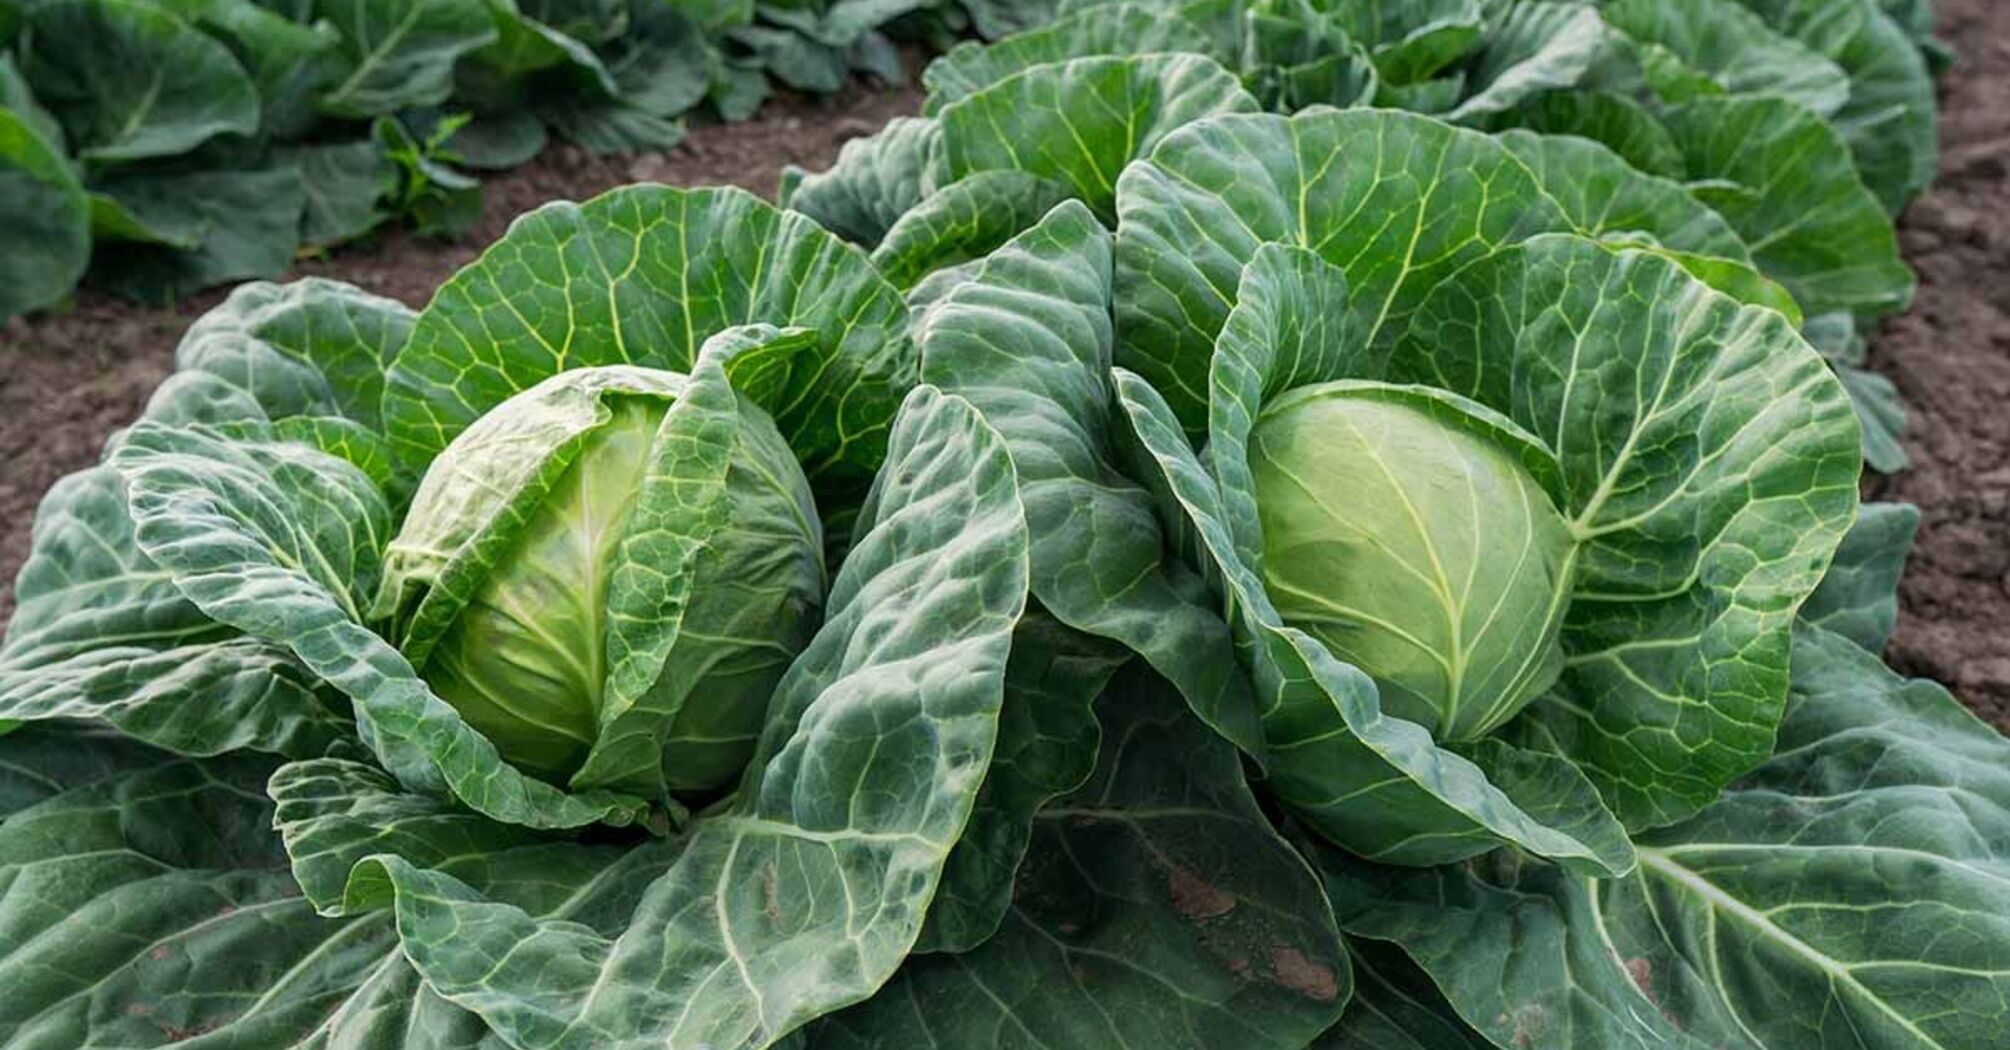 Do you need to remove lower leaves of cabbage